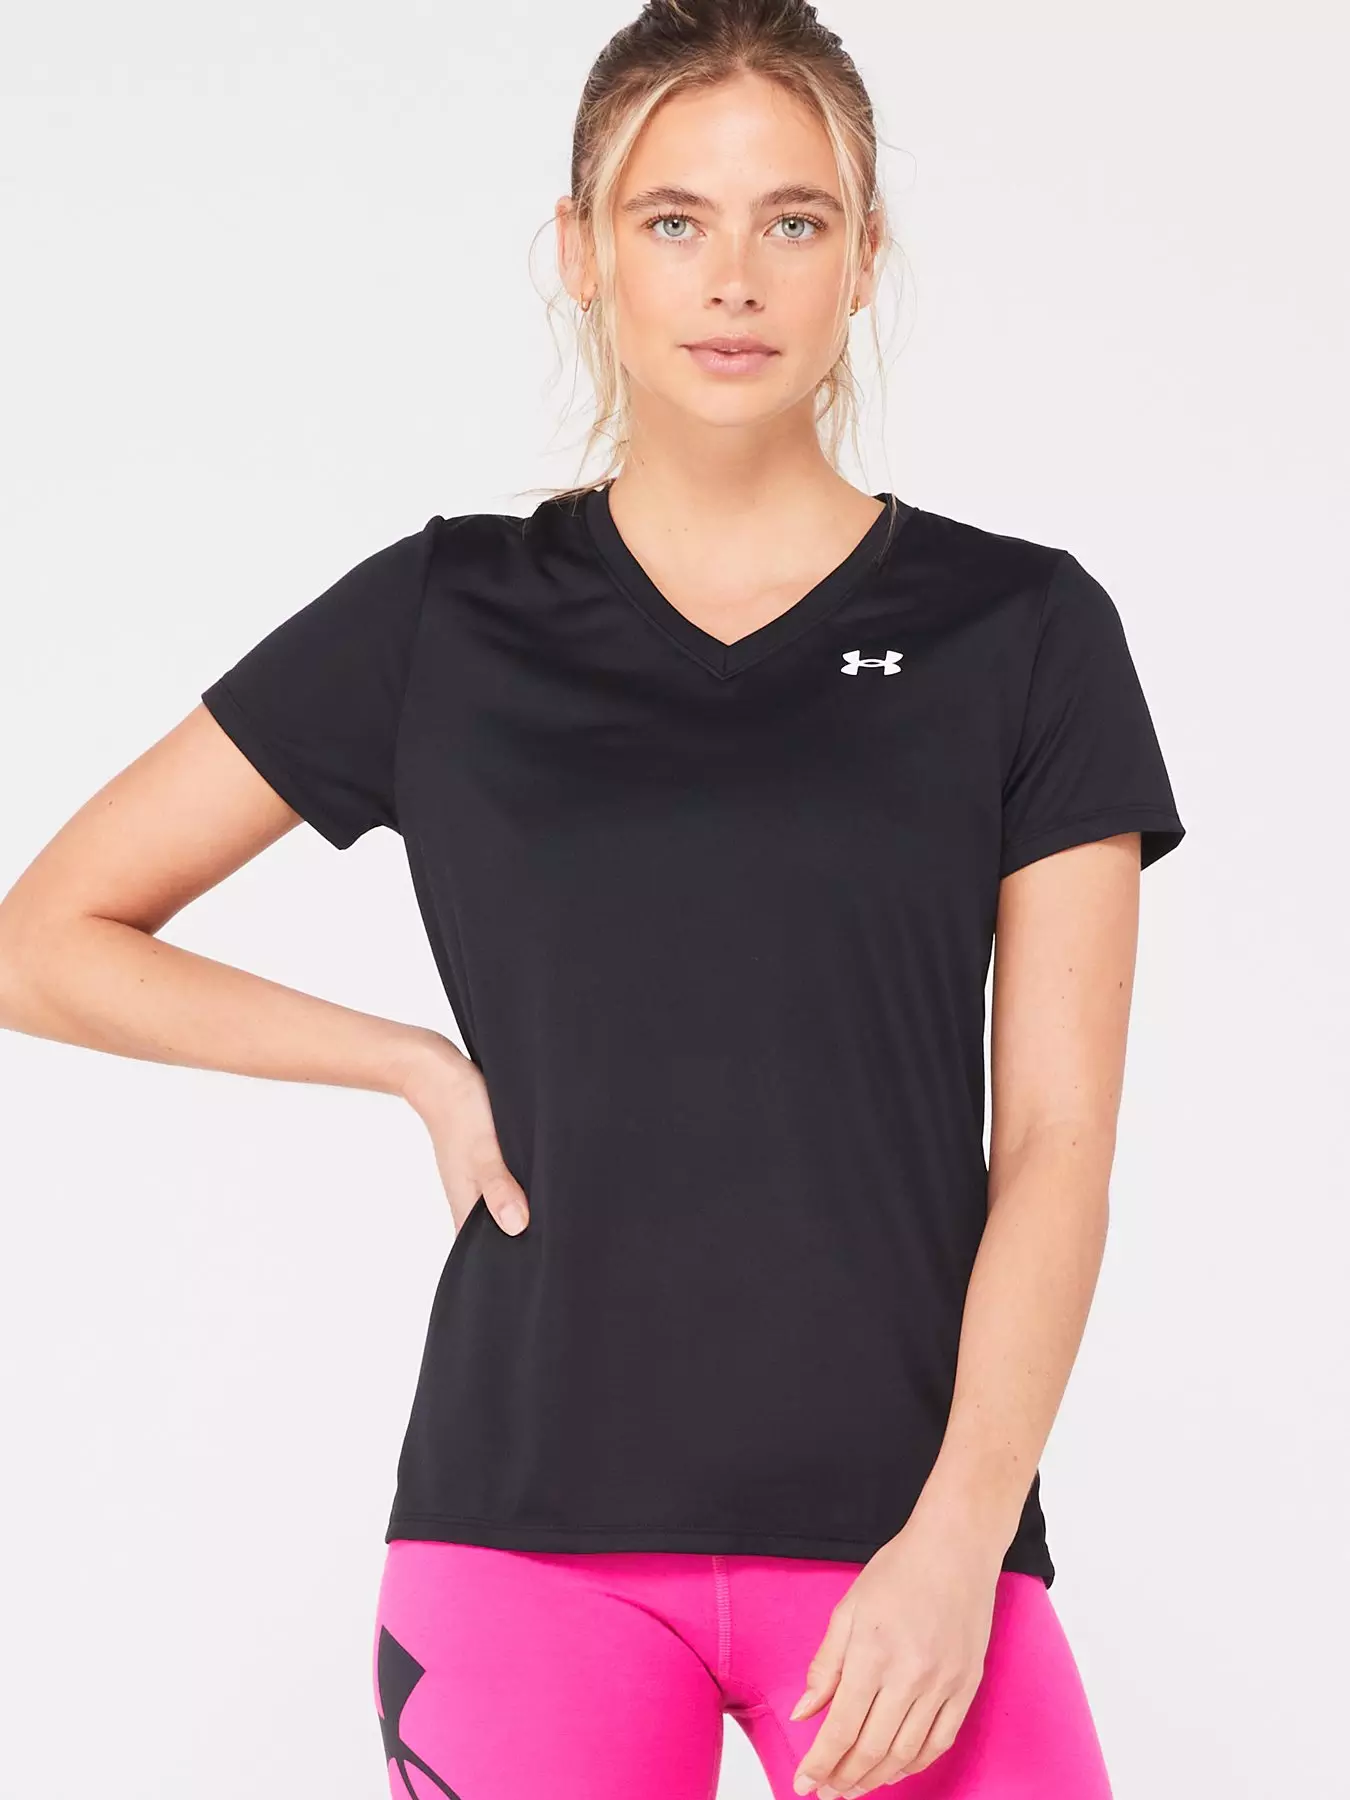 Womens Under Armour Clothing